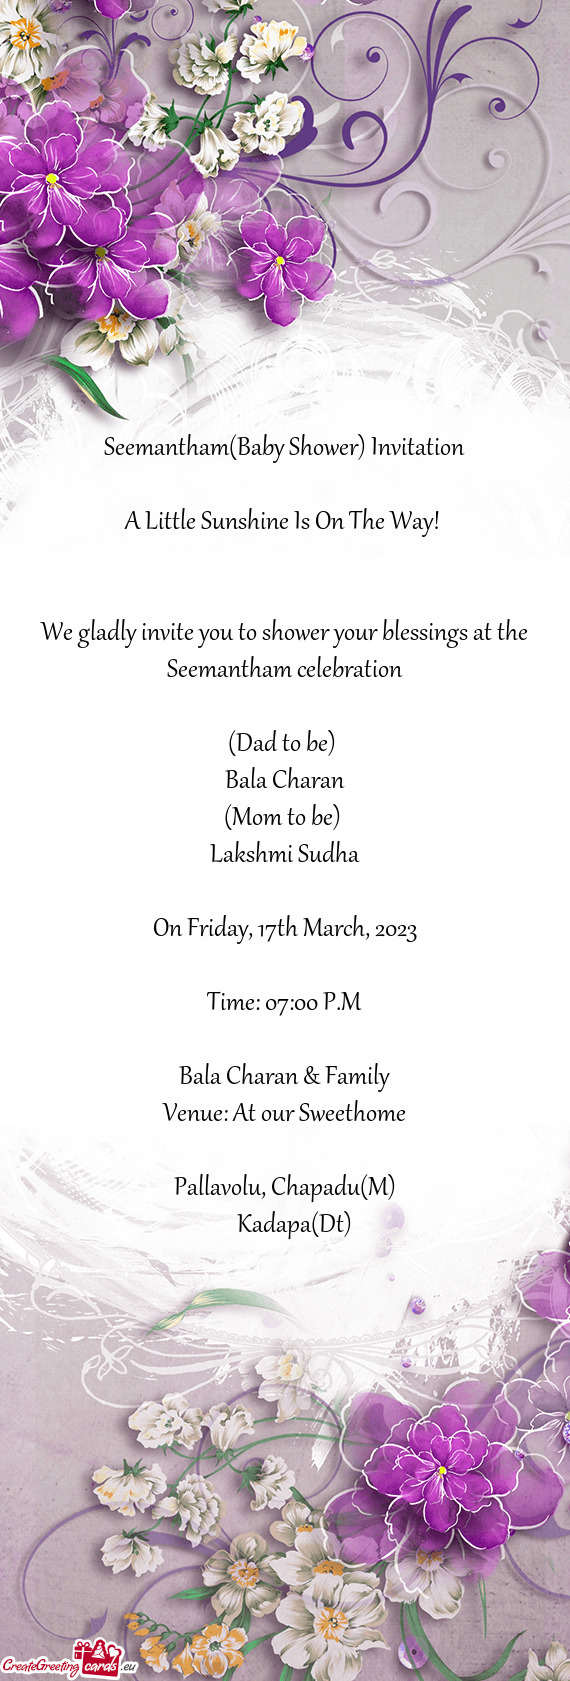 We gladly invite you to shower your blessings at the Seemantham celebration